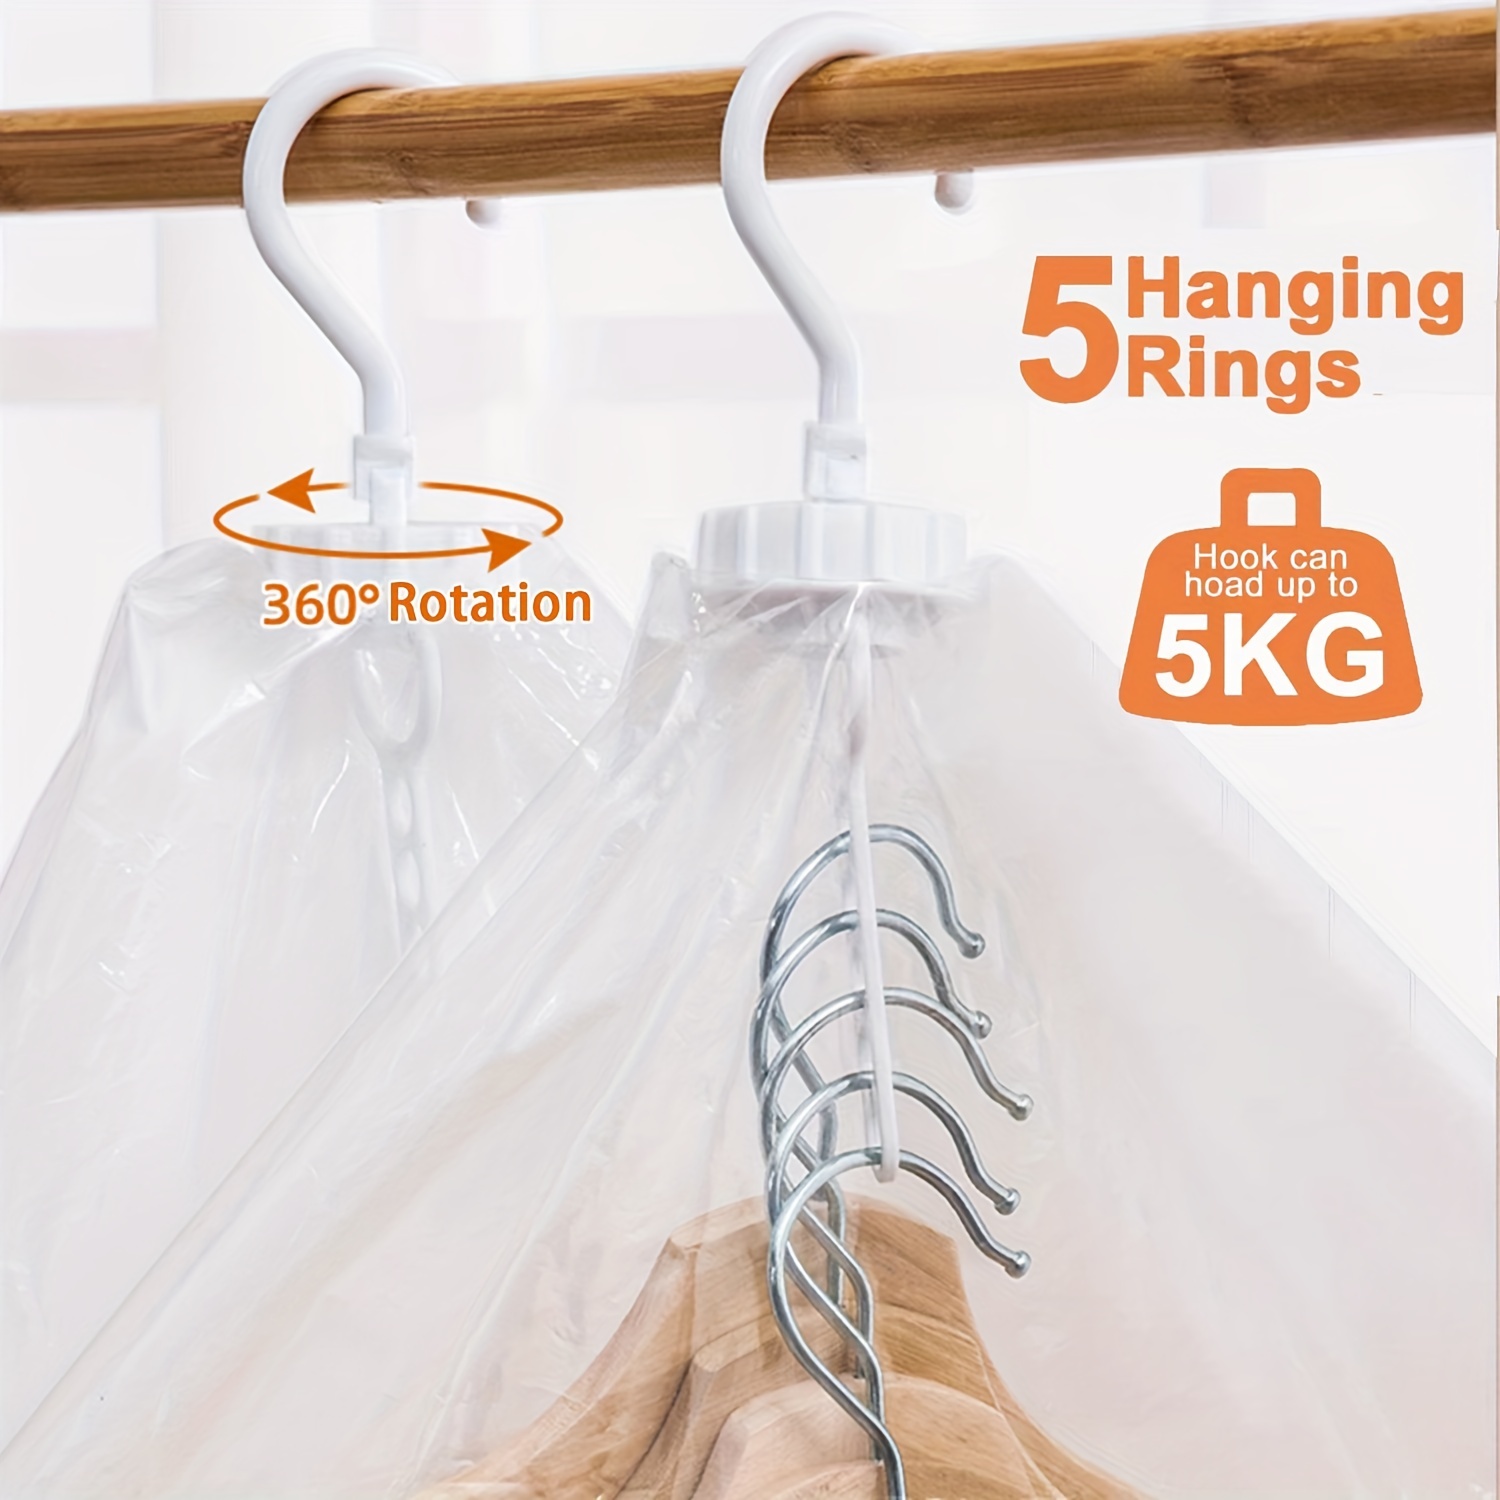 Vacuum Storage Bags for Clothes,Hanging Space Bags Clothes